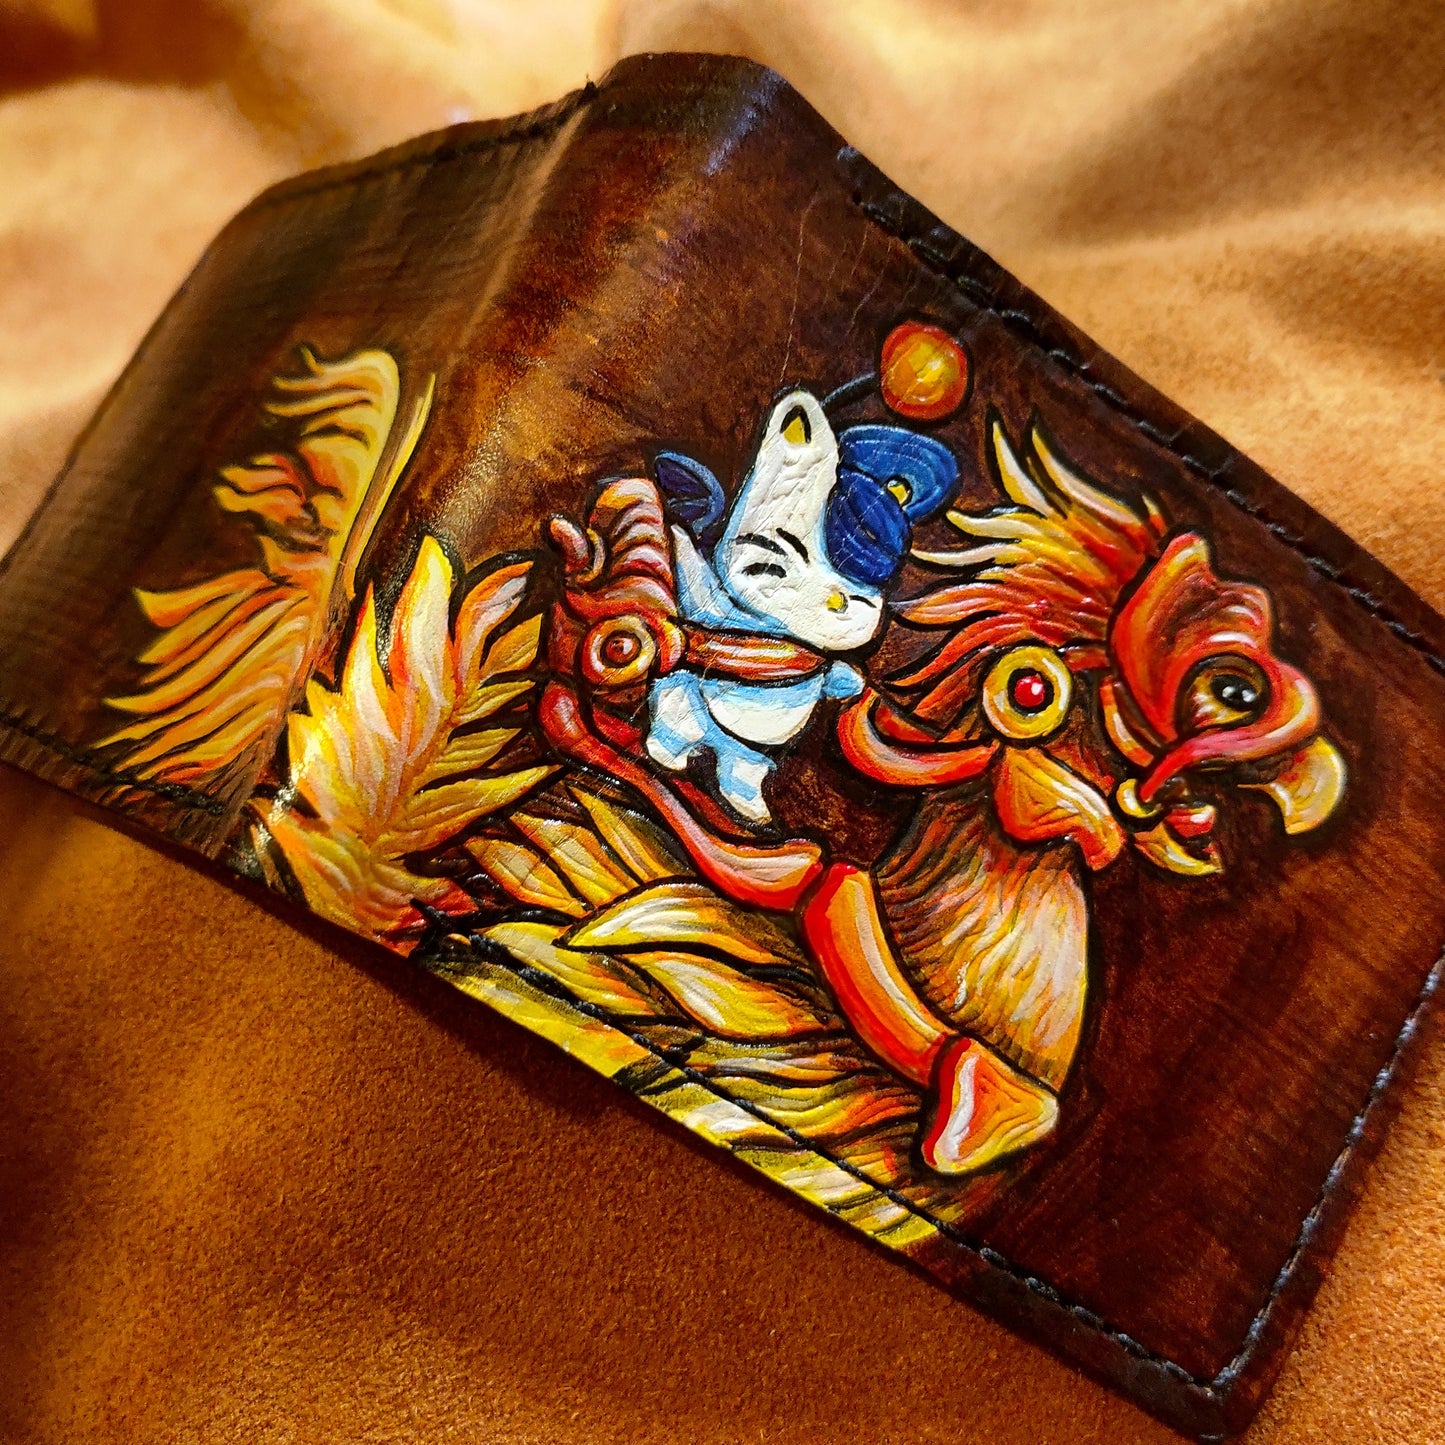 FF14 Gold Chocobo and moogle Rider - dark brown Leather Bifold Wallet - Handcrafted Final Fantasy 14 inspired Wallet -